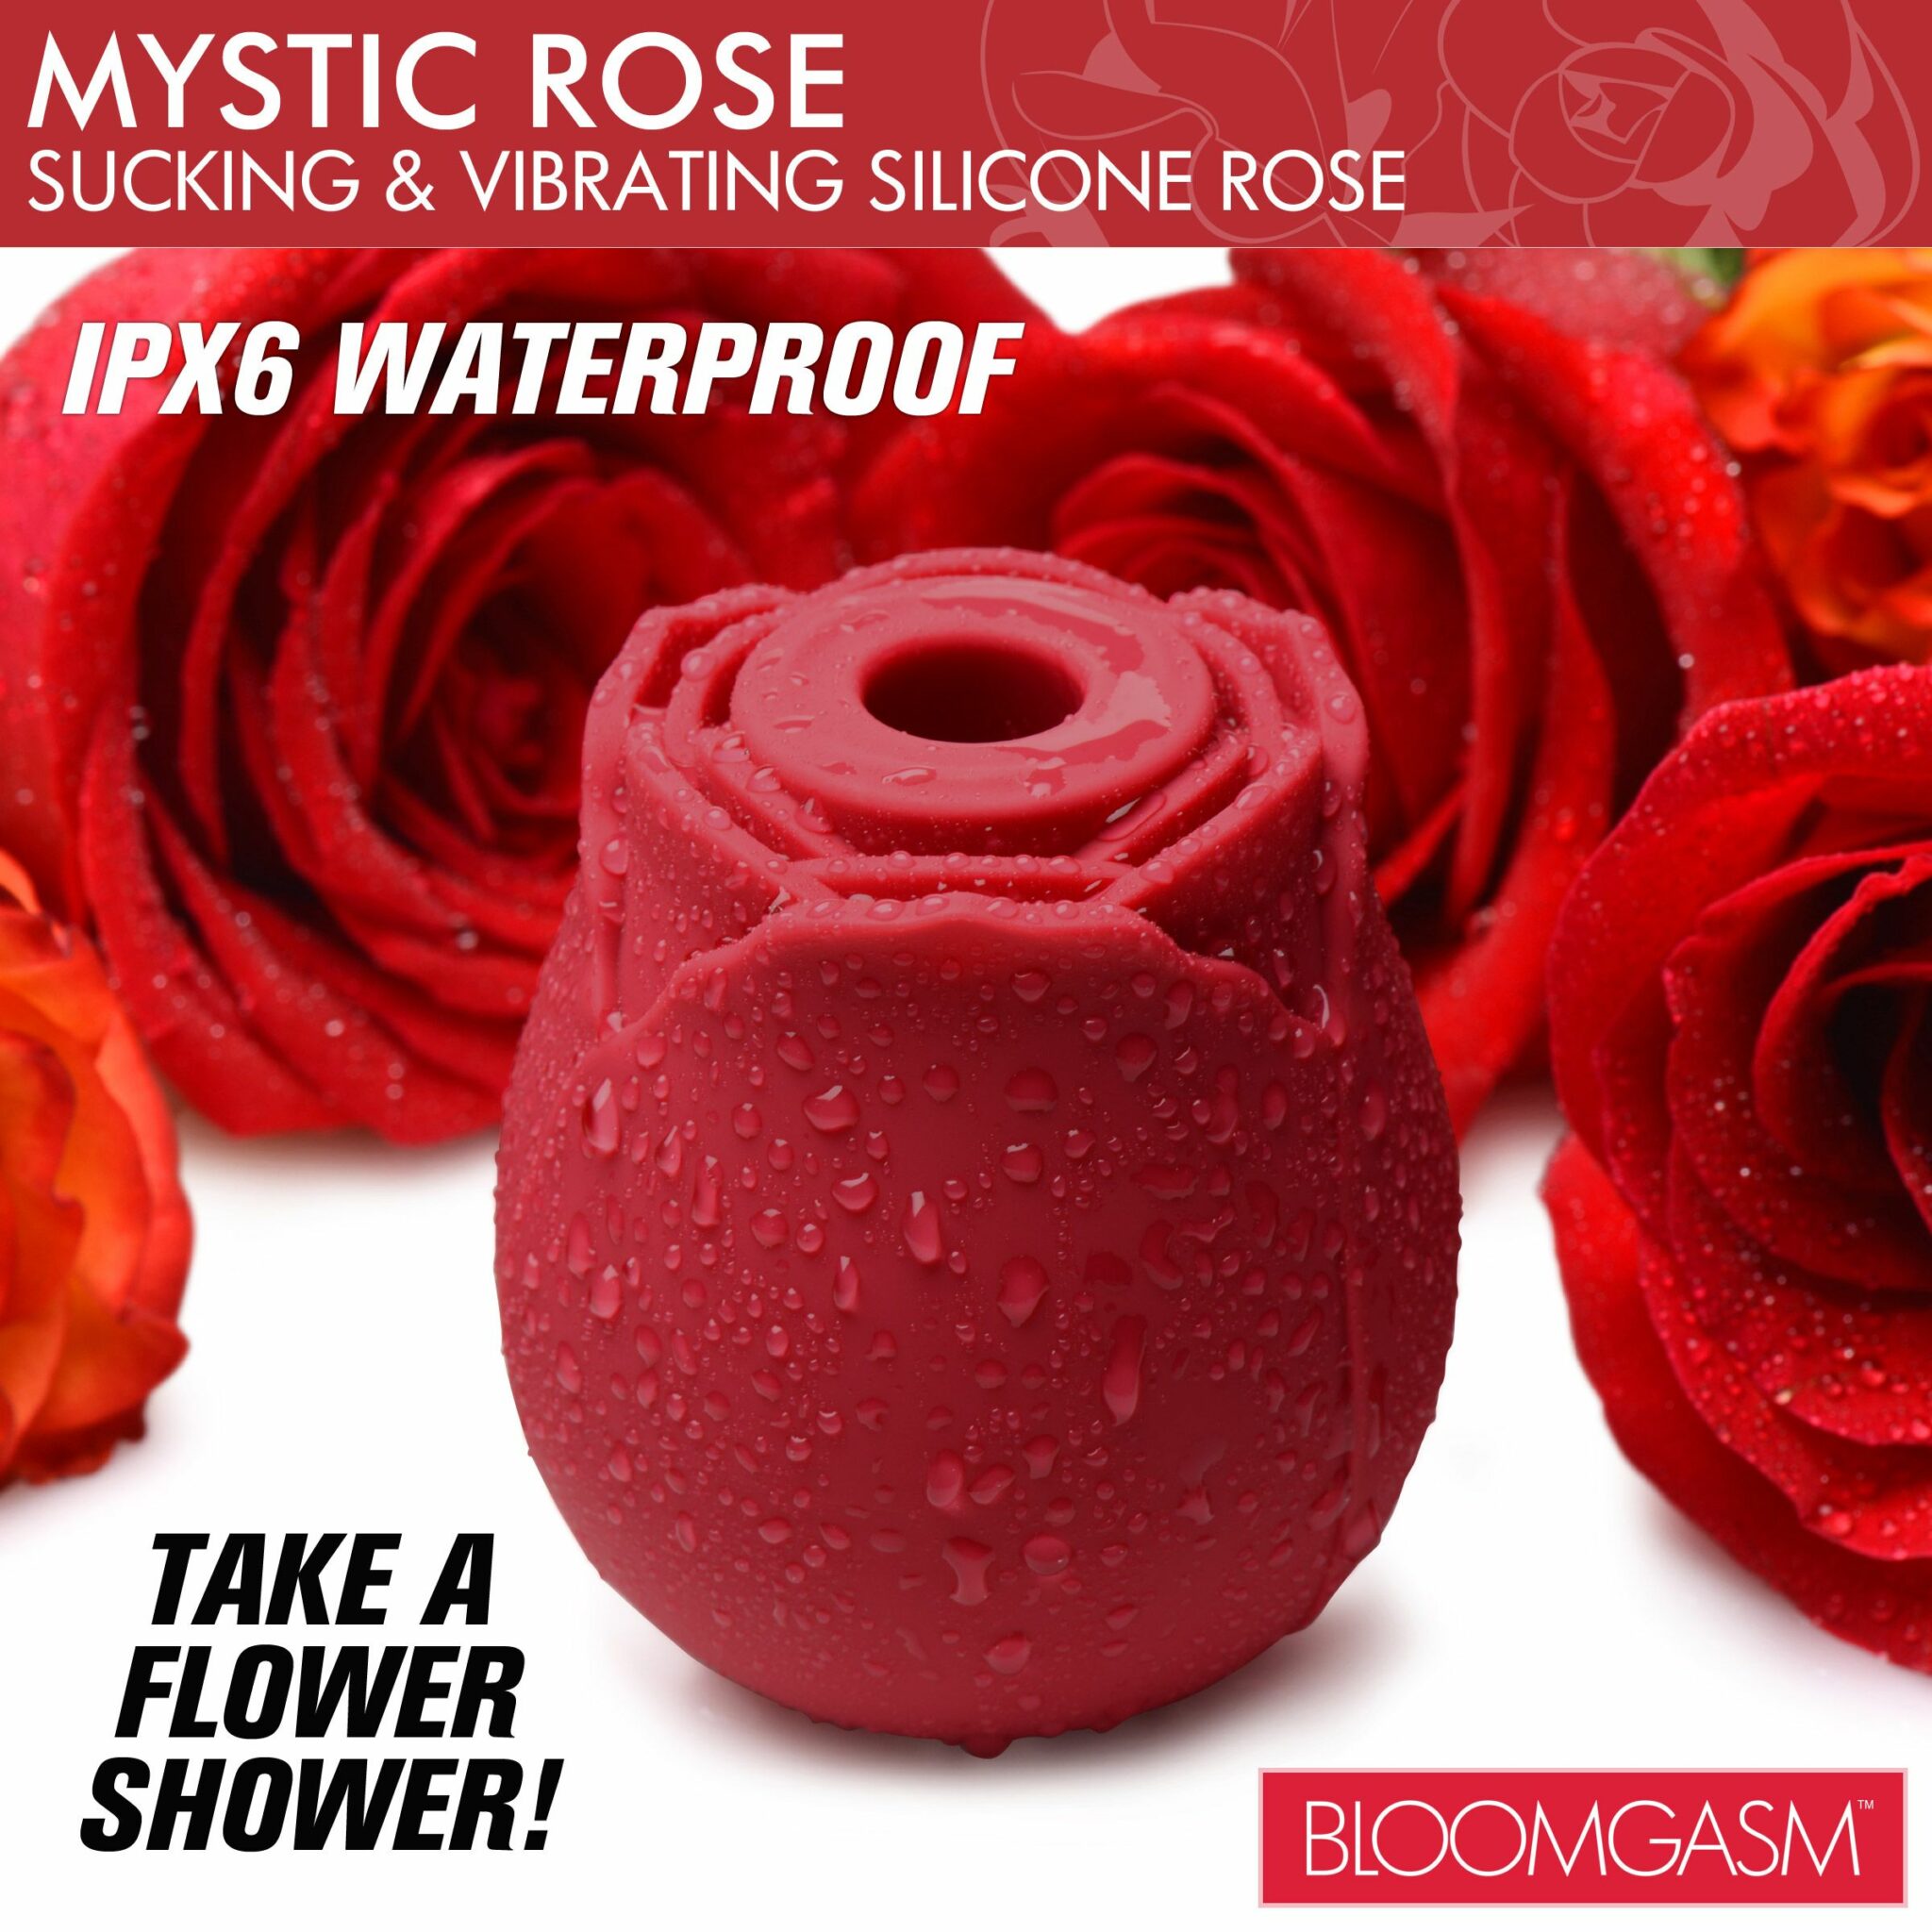 Mystic Rose Sucking and Vibrating Silicone Rose